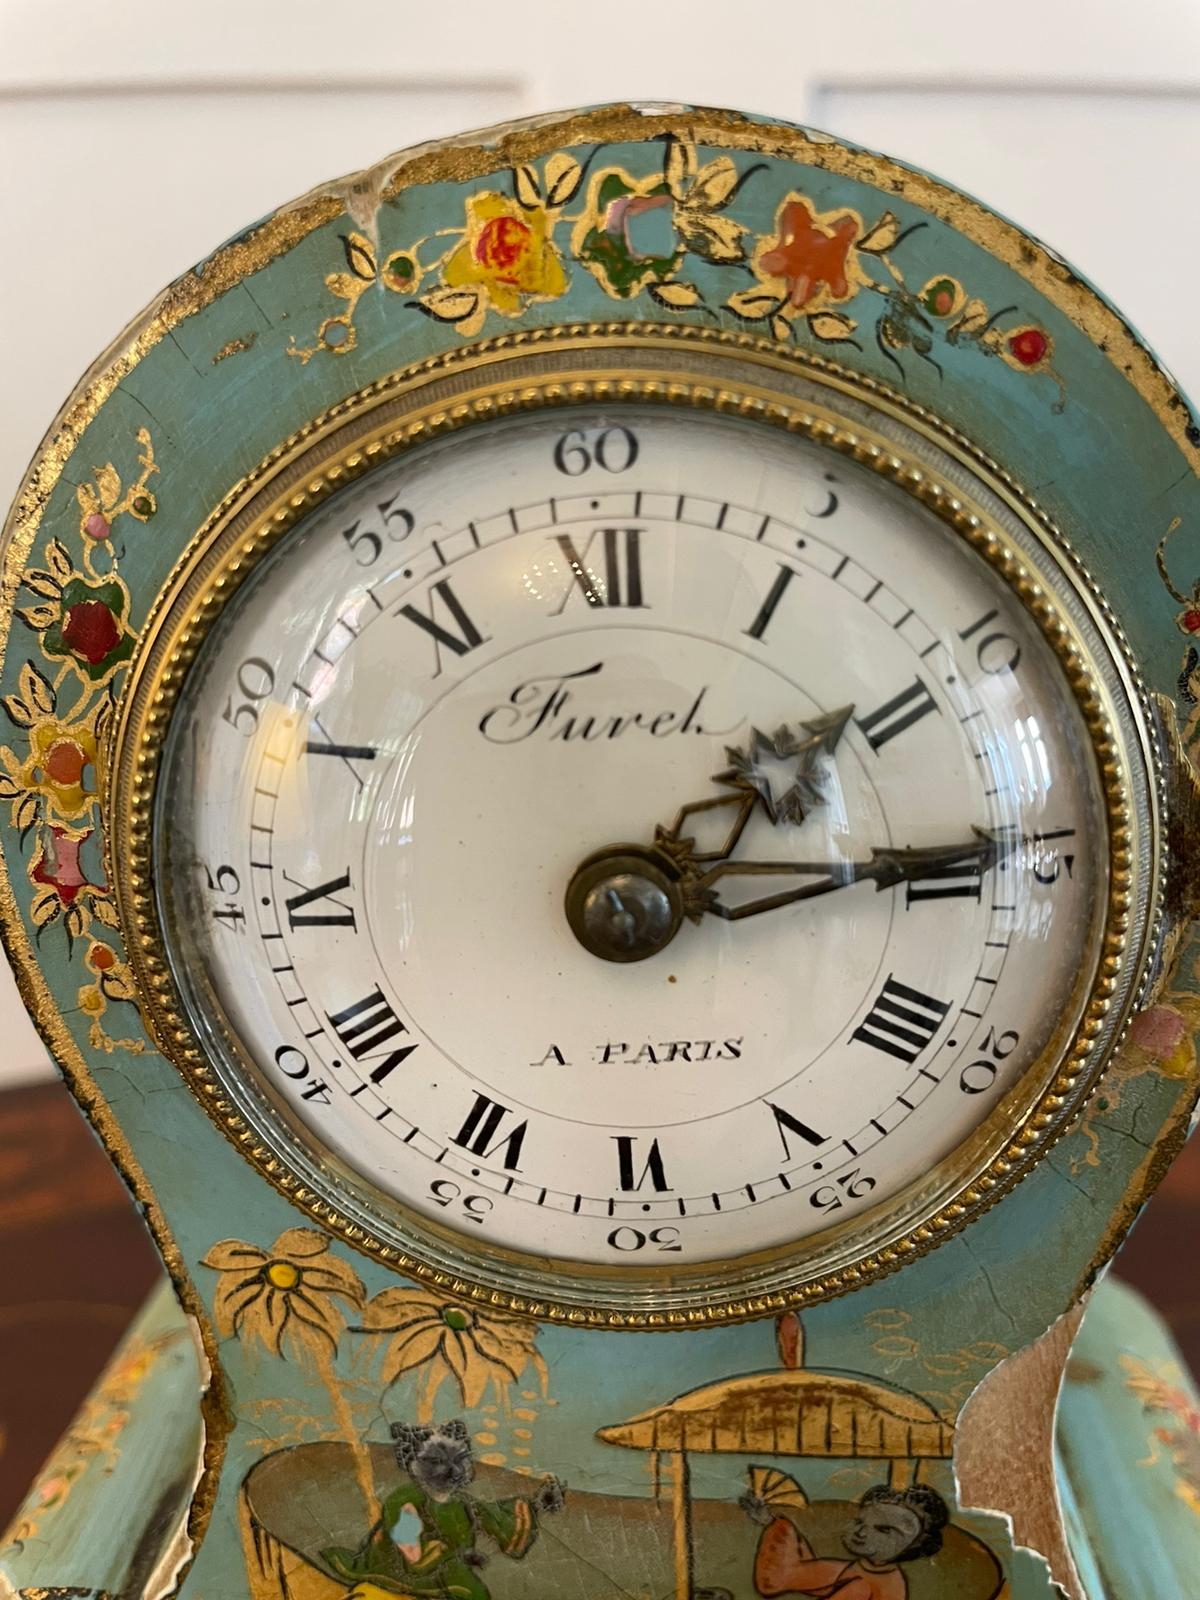 Antique French Japanned balloon desk clock boasting a pretty enamel dial with Roman and Arabic numerals, signed Furet A Paris. The case is beautifully decorated and is raised by Japanese figures with gilt highlights on a green background. It stands